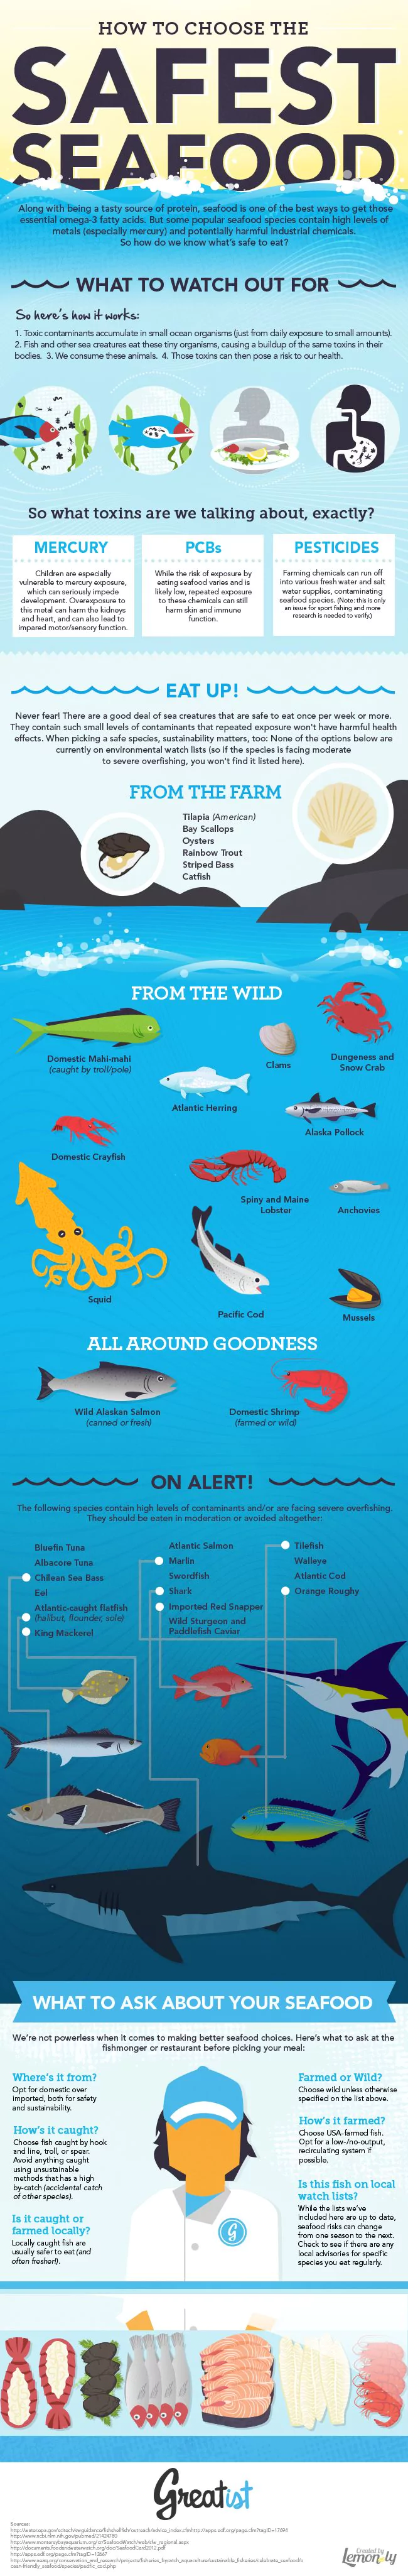 How to Choose the Safest Seafood